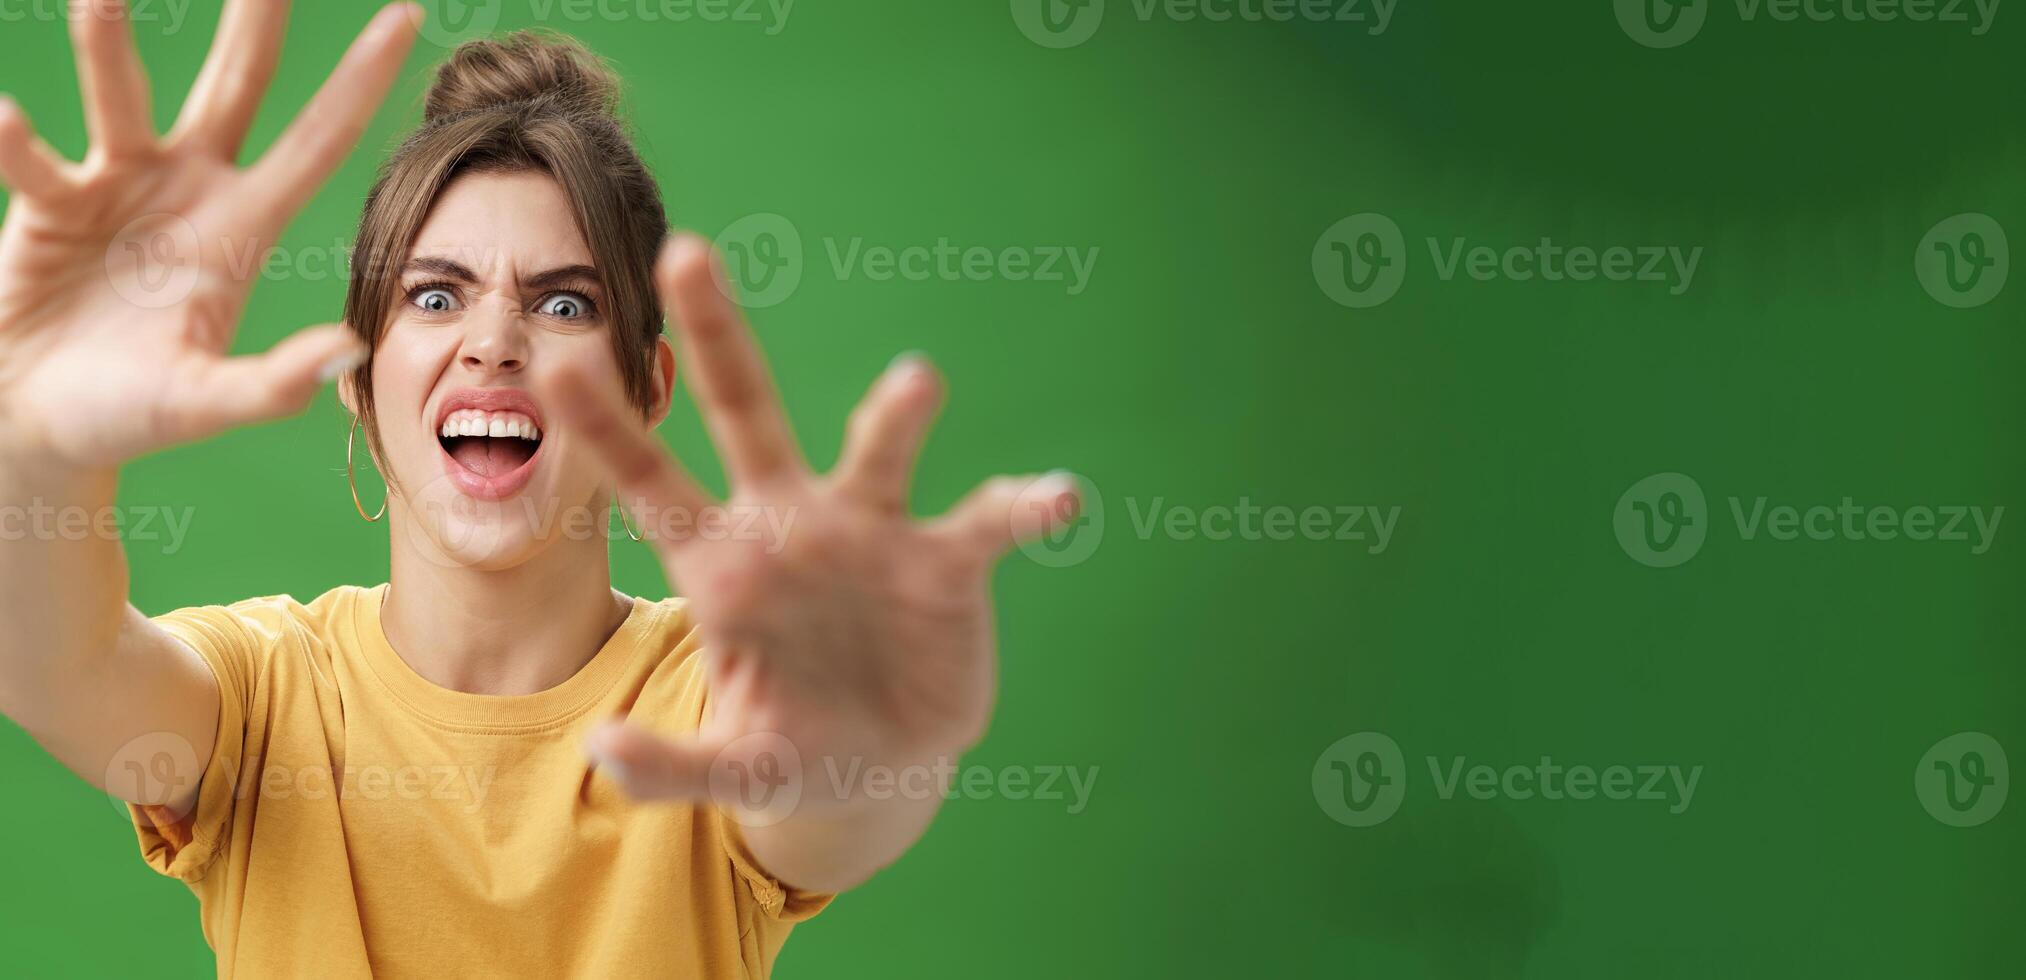 Funny emotive woman making fun face pulling hands forward to attack of grab something frowning opening mouth wanting cover face from camera, grimacing over green background photo